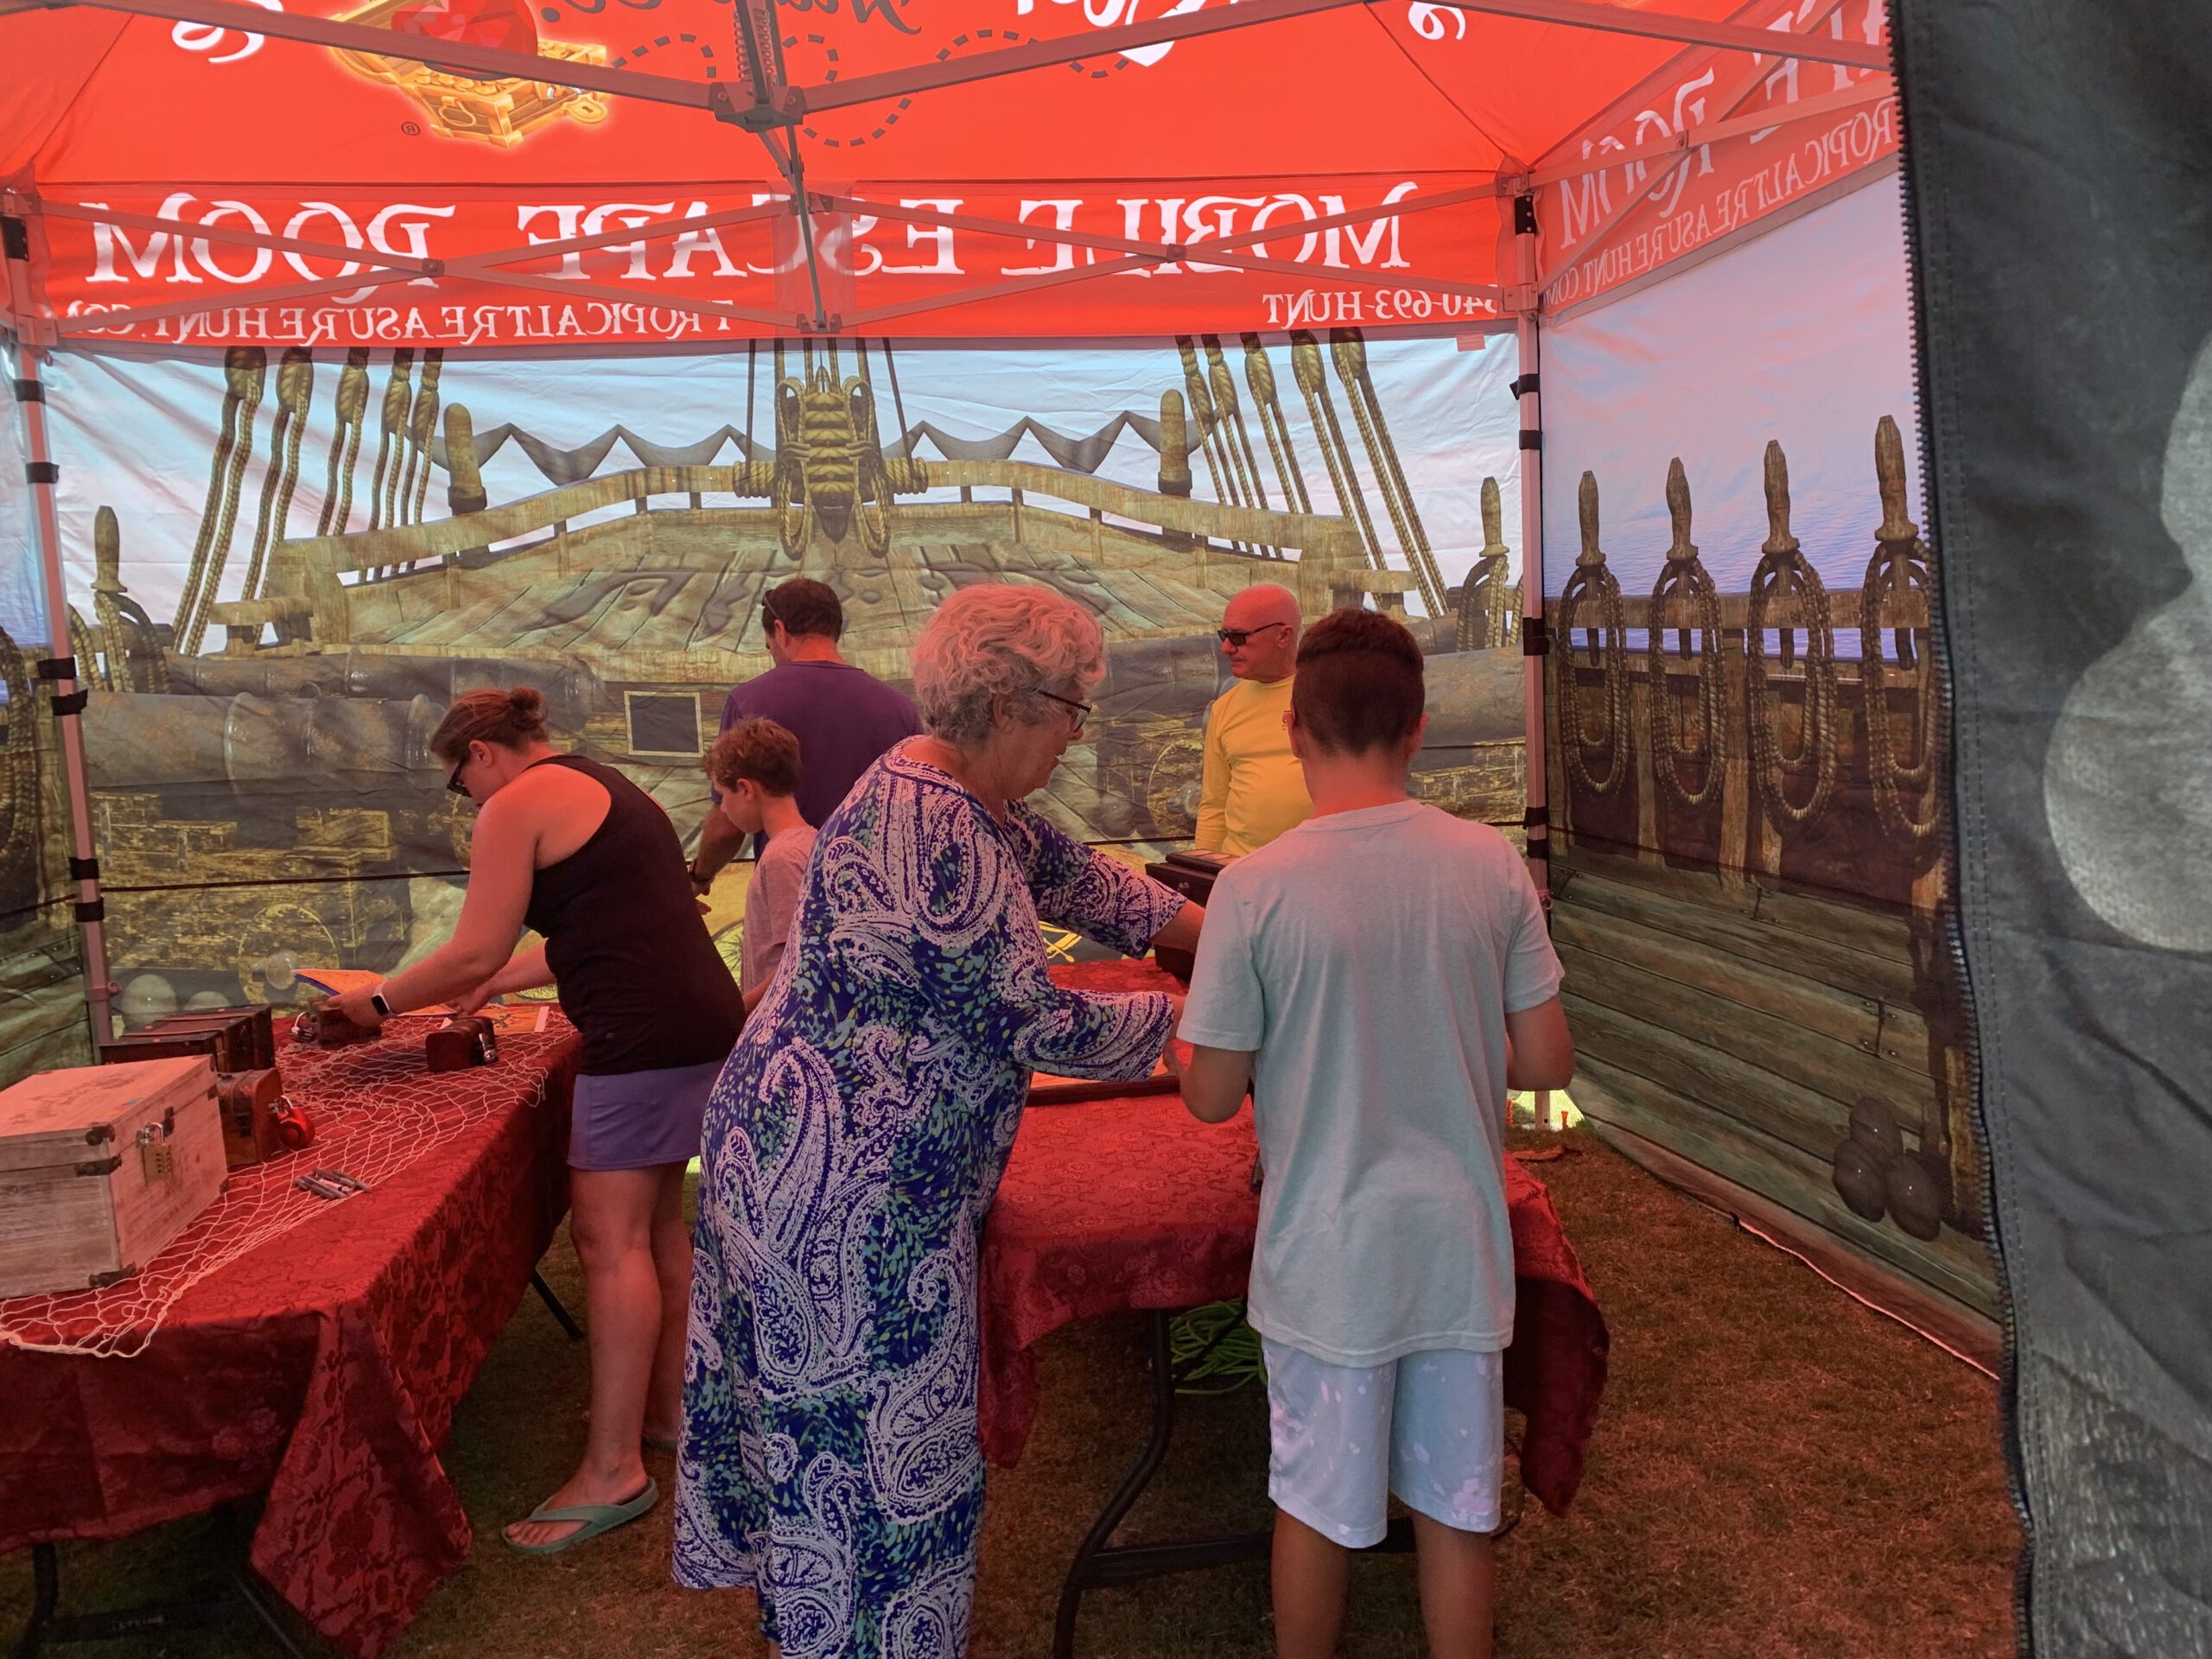 Guests try to solve the puzzles in the Mobile Escape Room Tent